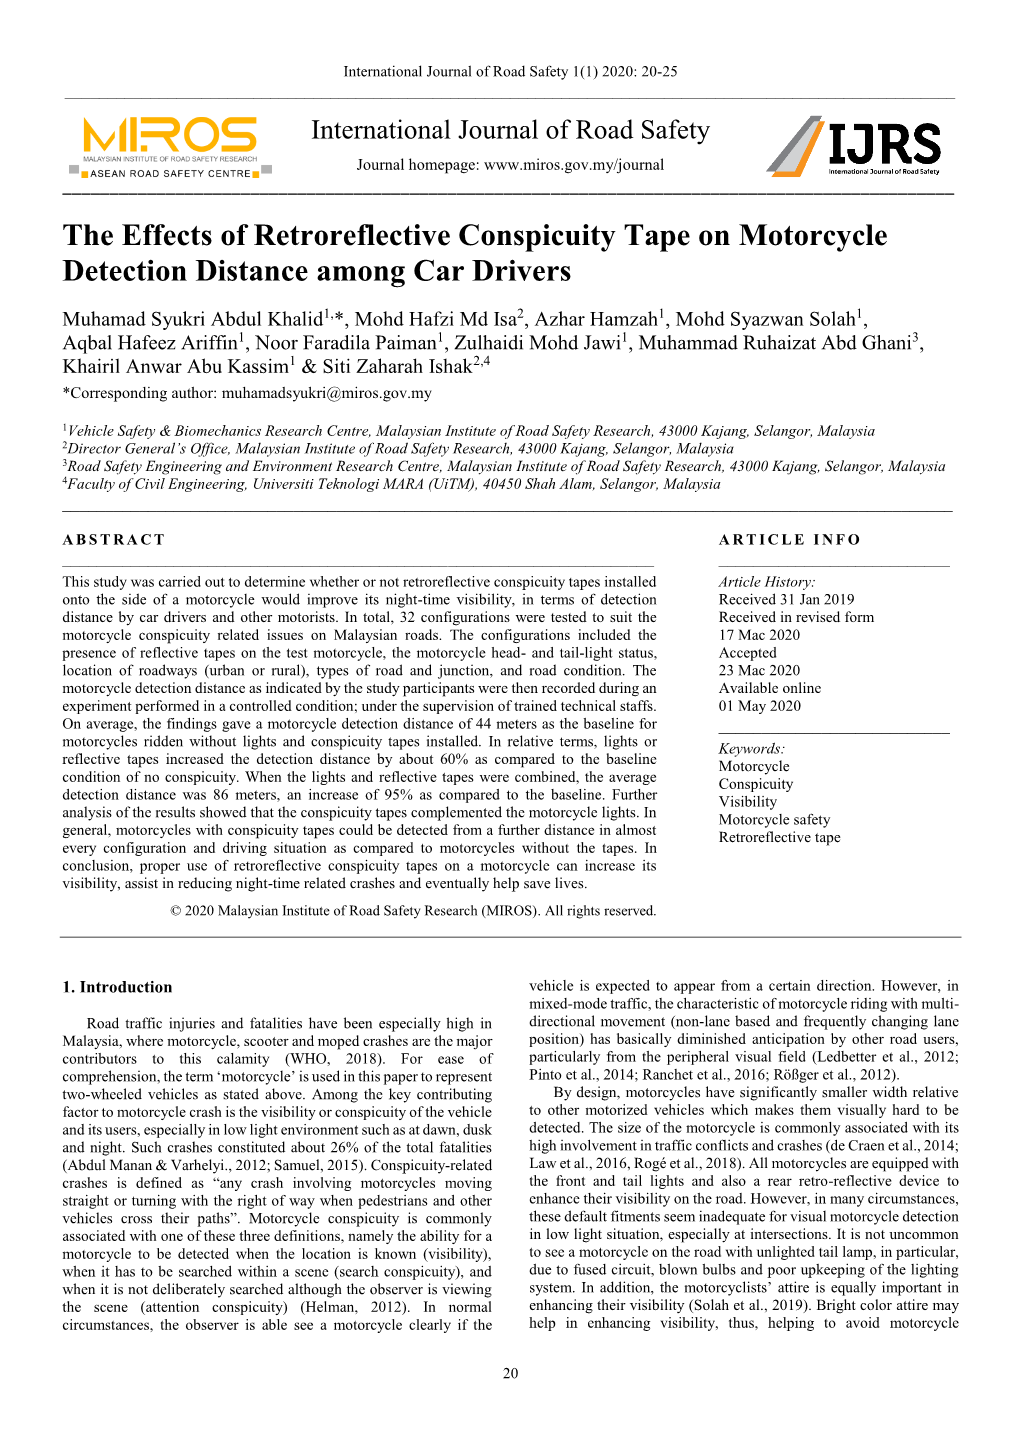 The Effects of Retroreflective Conspicuity Tape on Motorcycle Detection Distance Among Car Drivers